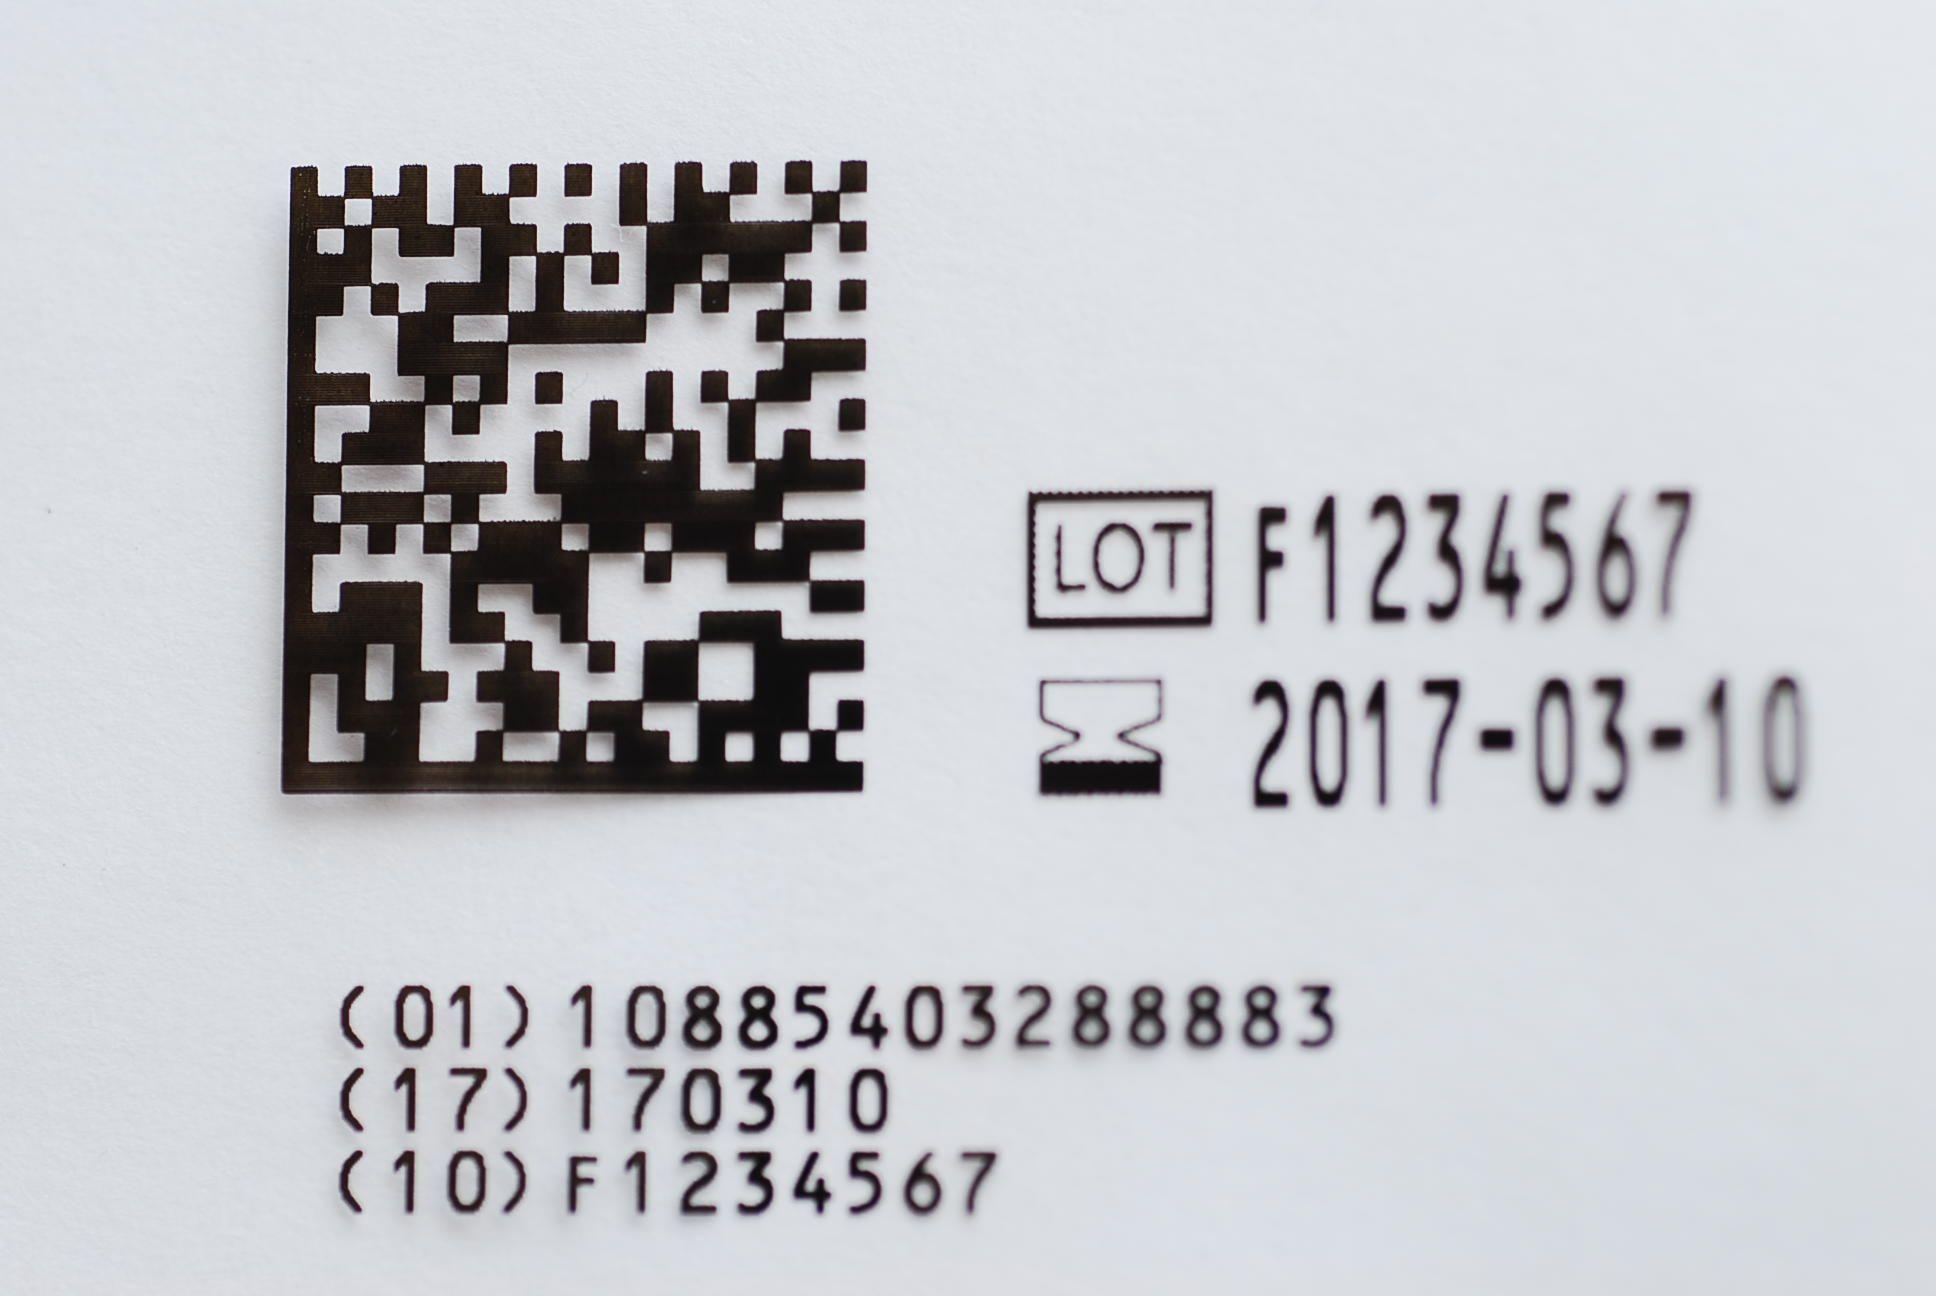 Photo of a barcode and item identification